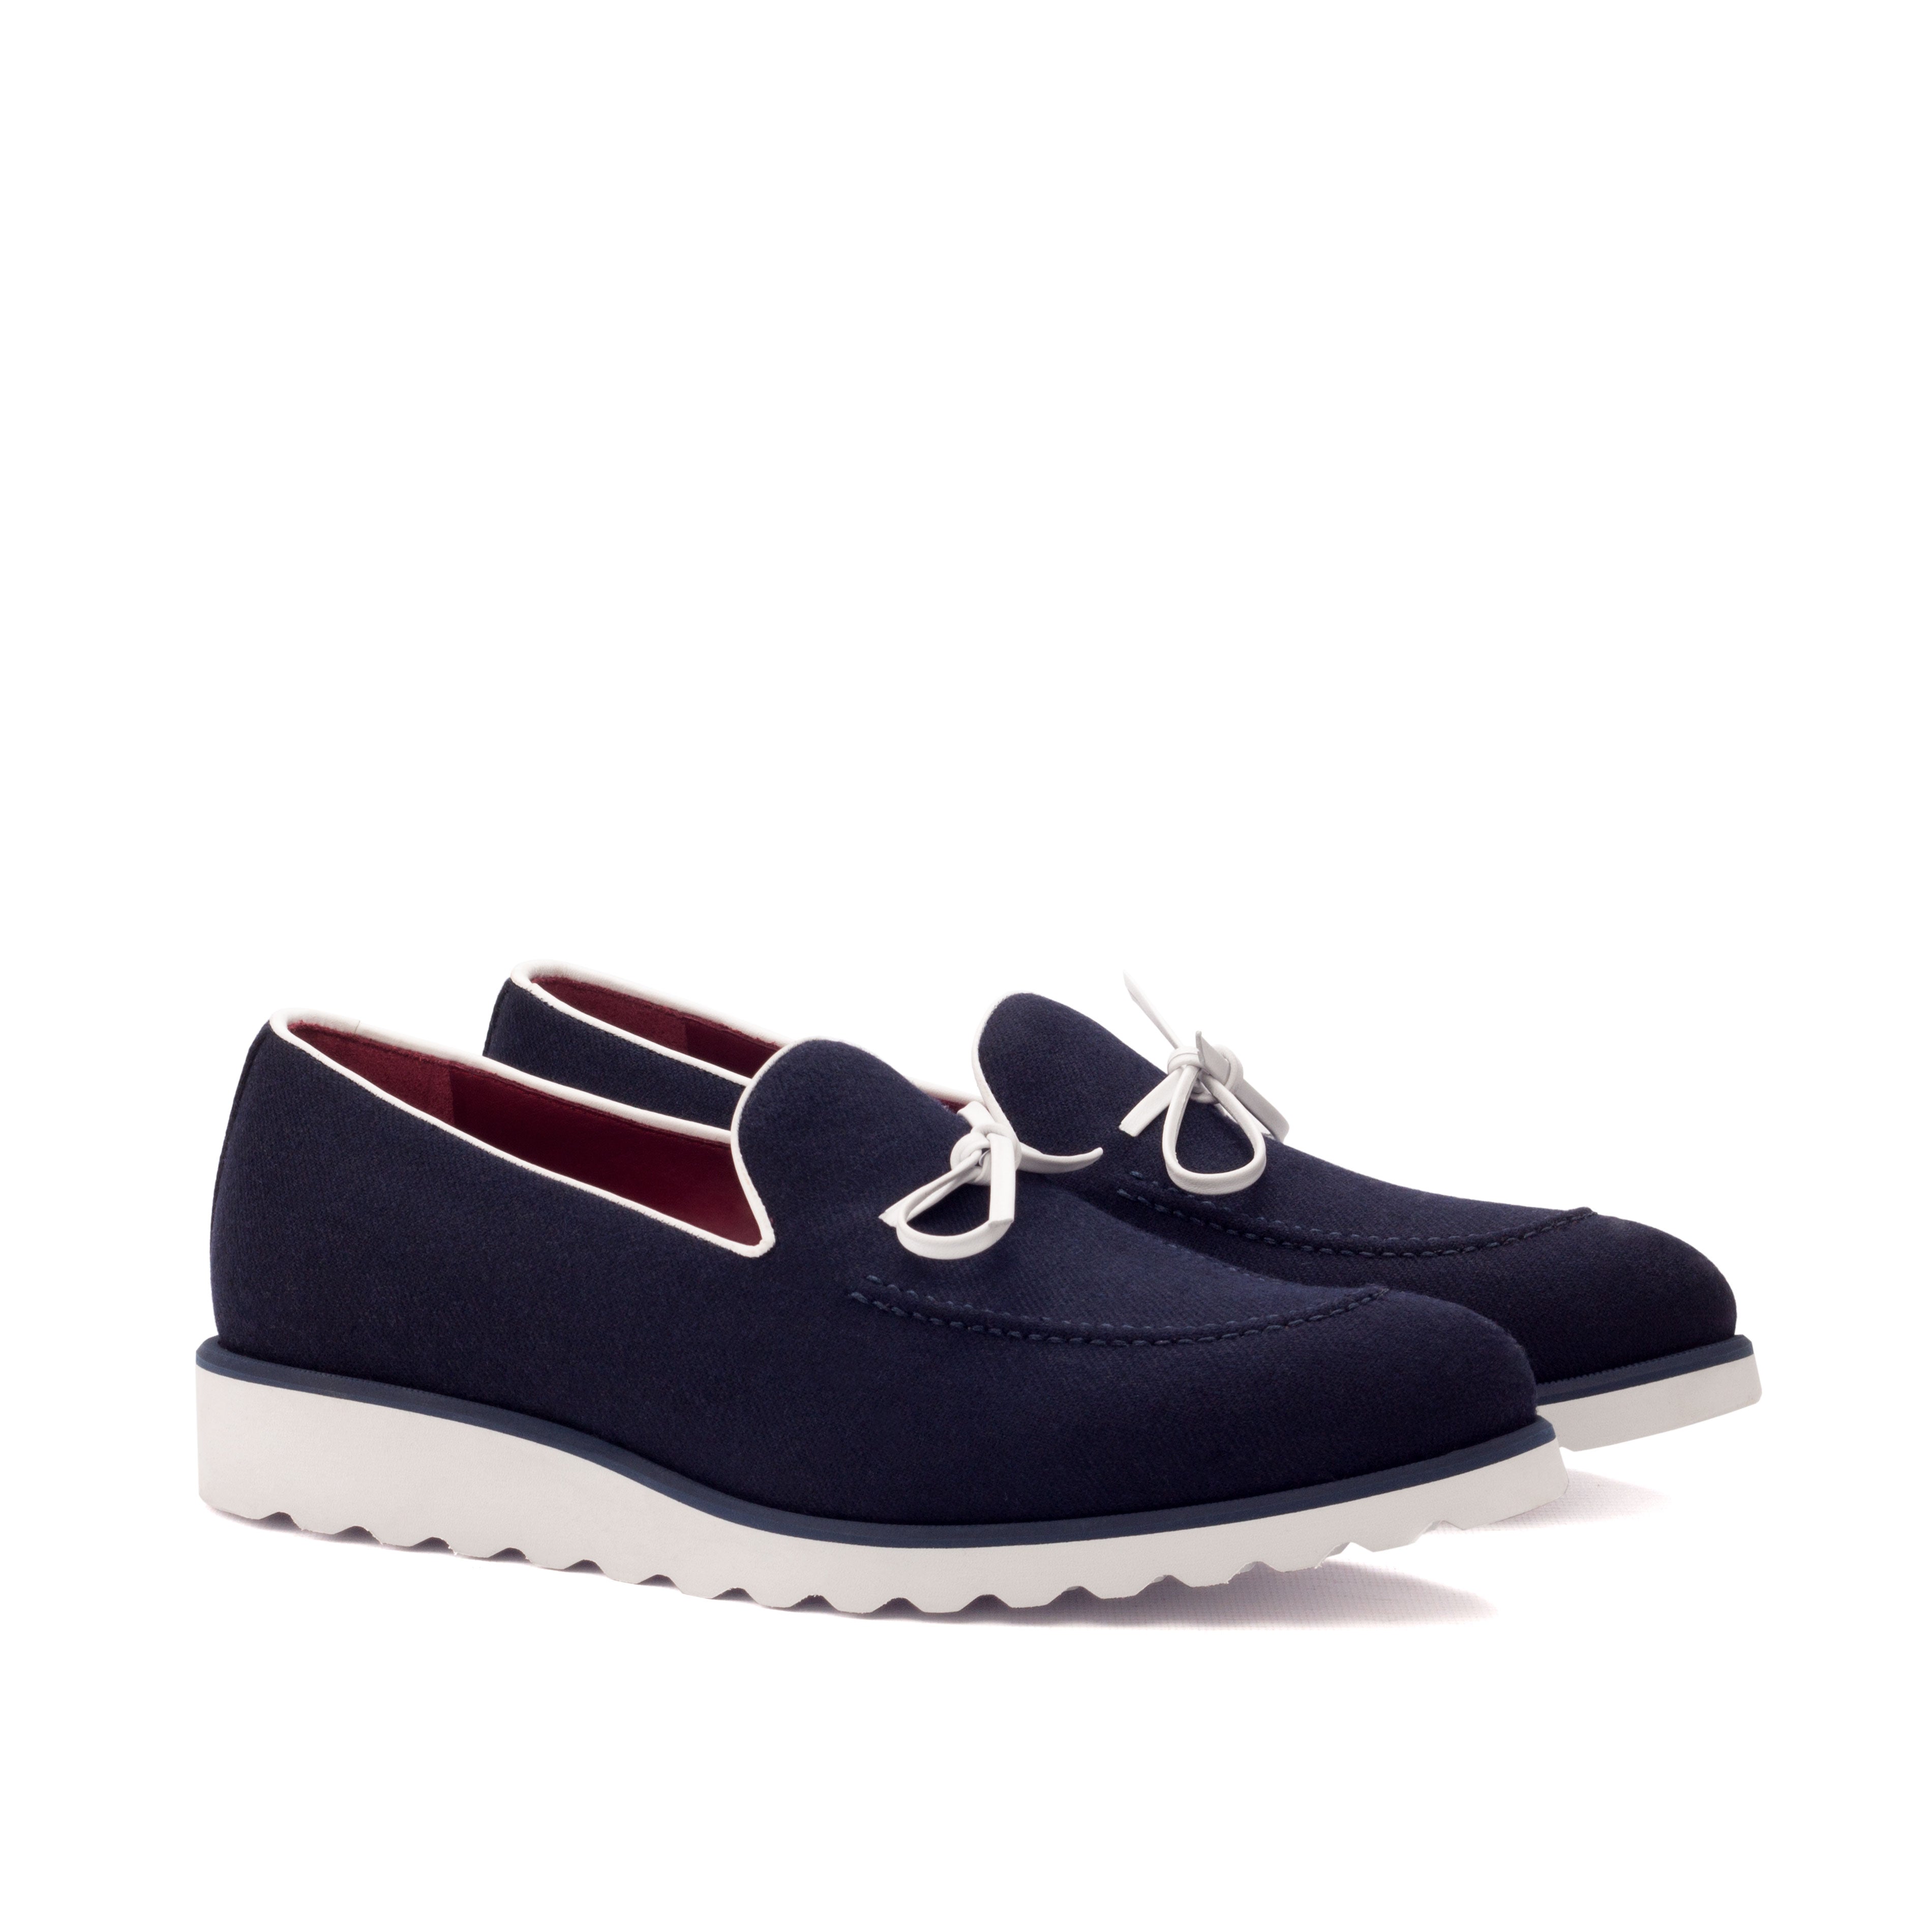 Navy Flannel Loafer with Sport Wedge Sole